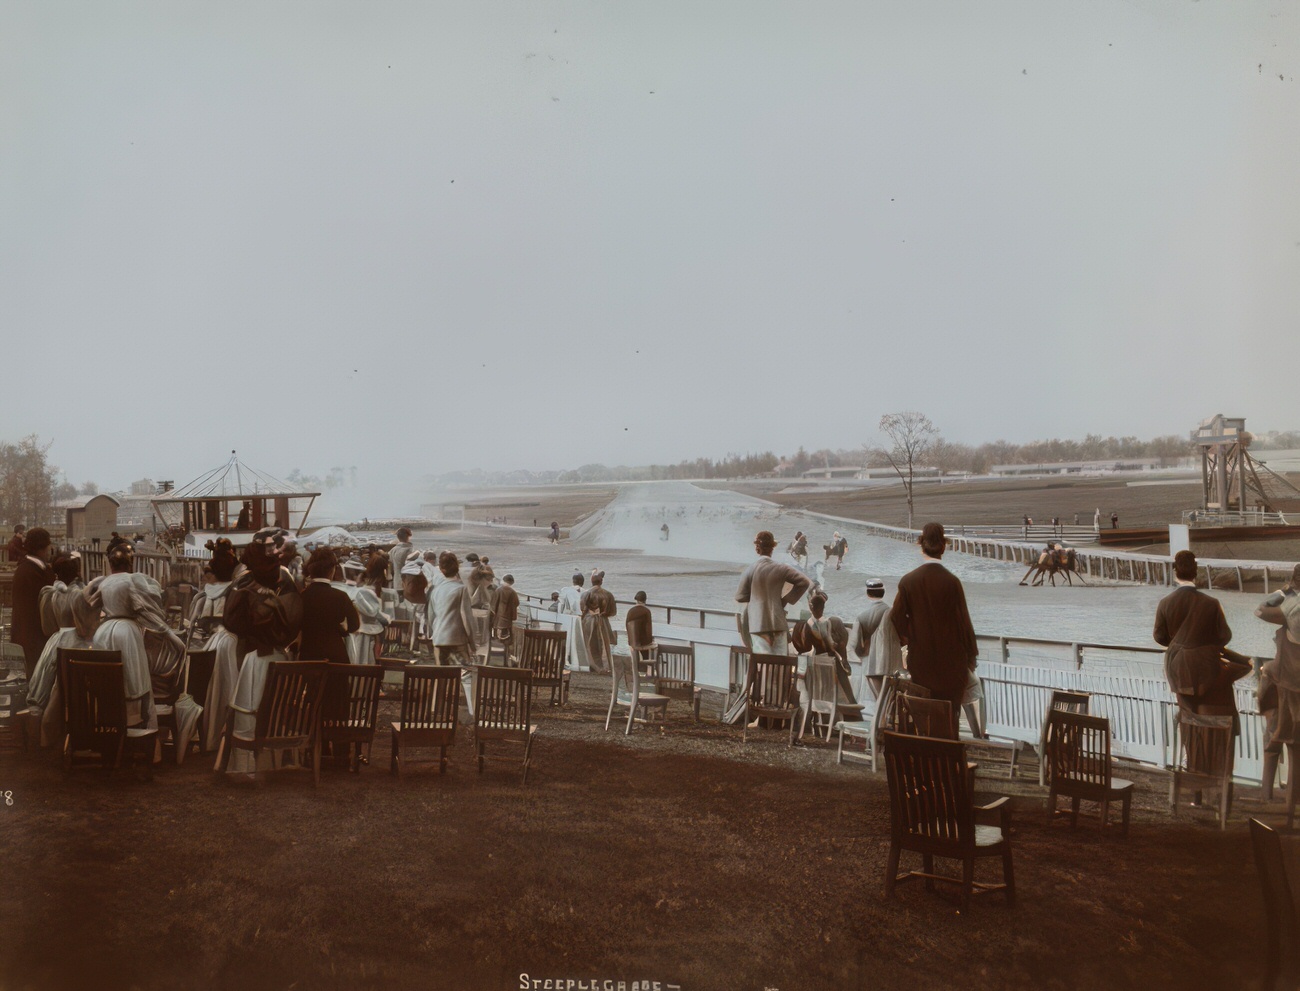 Spectators At A Steeplechase Event At Morris Park Race Track, Westchester, Now Part Of The Bronx, 1895.